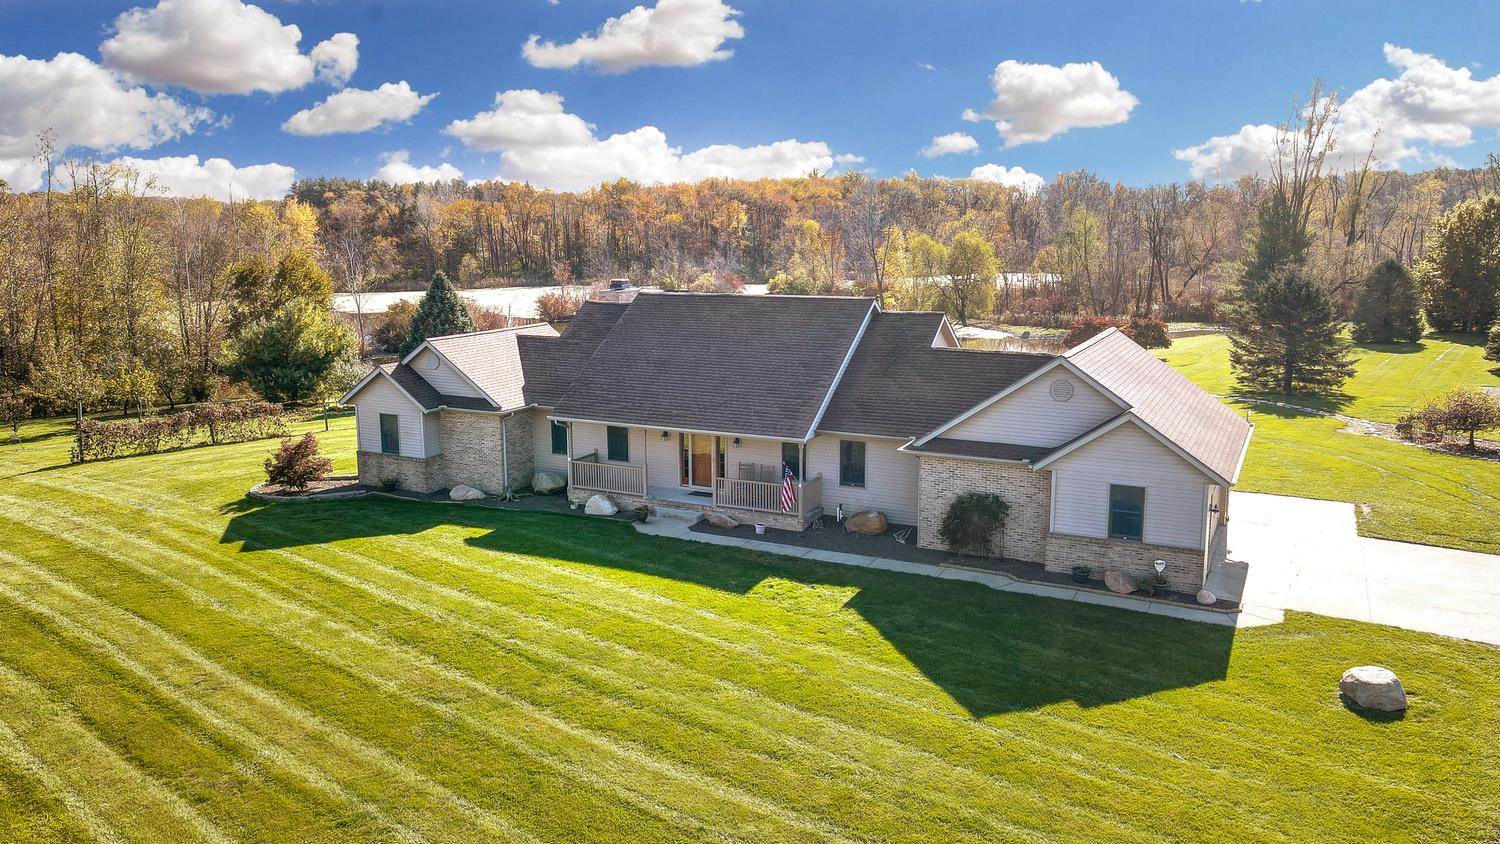 An exceptionally beautiful and rural homestead situated on 20 acres of country paradise. The perfect oasis with an abundance of wildlife + private pond. This custom built, spacious ranch home with walkout basement offers over 2,900 finished sq. ft. plus a spacious 17x17 wine cellar! Welcomed by excellent curb appeal and a covered front porch. As you enter into the front foyer you’ll find hardwood floors leading you into the formal living room to the left side & formal dining to the right. Just down the hall a powder room, spacious kitchen open to the breakfast area and family room. Any home chef will appreciate the ample cabinet space, built in pantry & uninterrupted views of nature’s paradise in your own back yard! With breakfast bar, adjacent dining space, access to the backyard deck and open to the family room boasting plenty of natural light, vaulted ceilings, fireplace, access to the backyard & additional views of the surrounding acreage. Just around the corner is the grand master suite with trey ceilings, walk in closet, private en-suite & personal access to the backyard deck and yard. At the lower level, you can unwind in the walkout den with private full size bar made from harvested cherry wood from the homestead & oversized wine cellar! Two additional bedrooms located at the basement level with full bath & mechanical room with storage space. Outside amenities include gas hook up at the deck, two large out buildings, one of which is finished with office space and full bath. A nature lover’s paradise- this property has a fully stocked pond along with four acres of active and thriving wetlands. Woods at the back of the home are perfect for hunting and the property hosts a large asparagus field, mature fruit trees and shooting range. Additional amenities include two year roof, newer geothermal unit, main floor laundry and more!